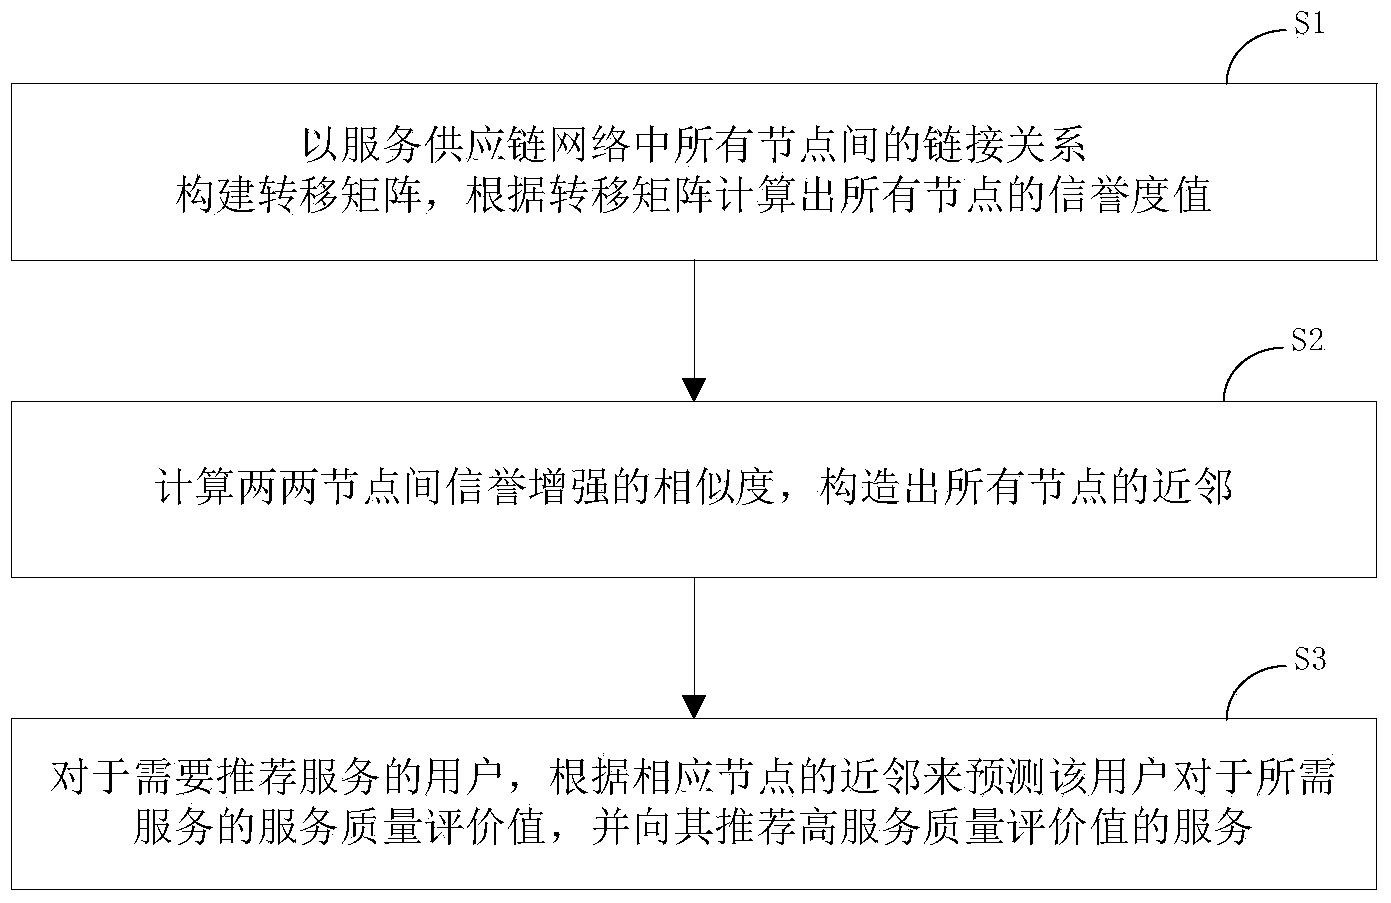 Service recommendation method oriented to service supply chain network